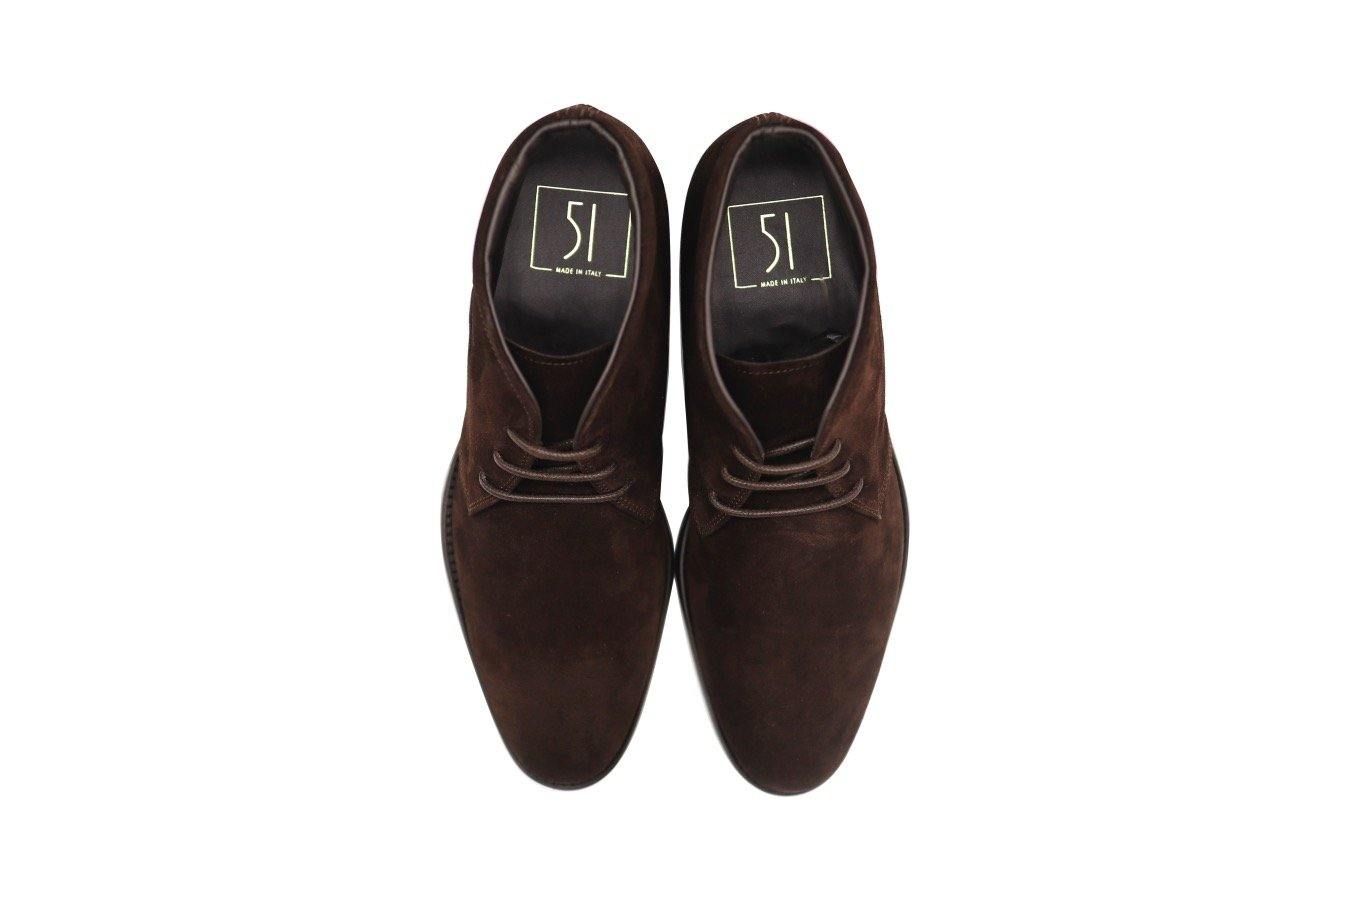 Top View of Mens Dark Brown Suede Chukka Boots